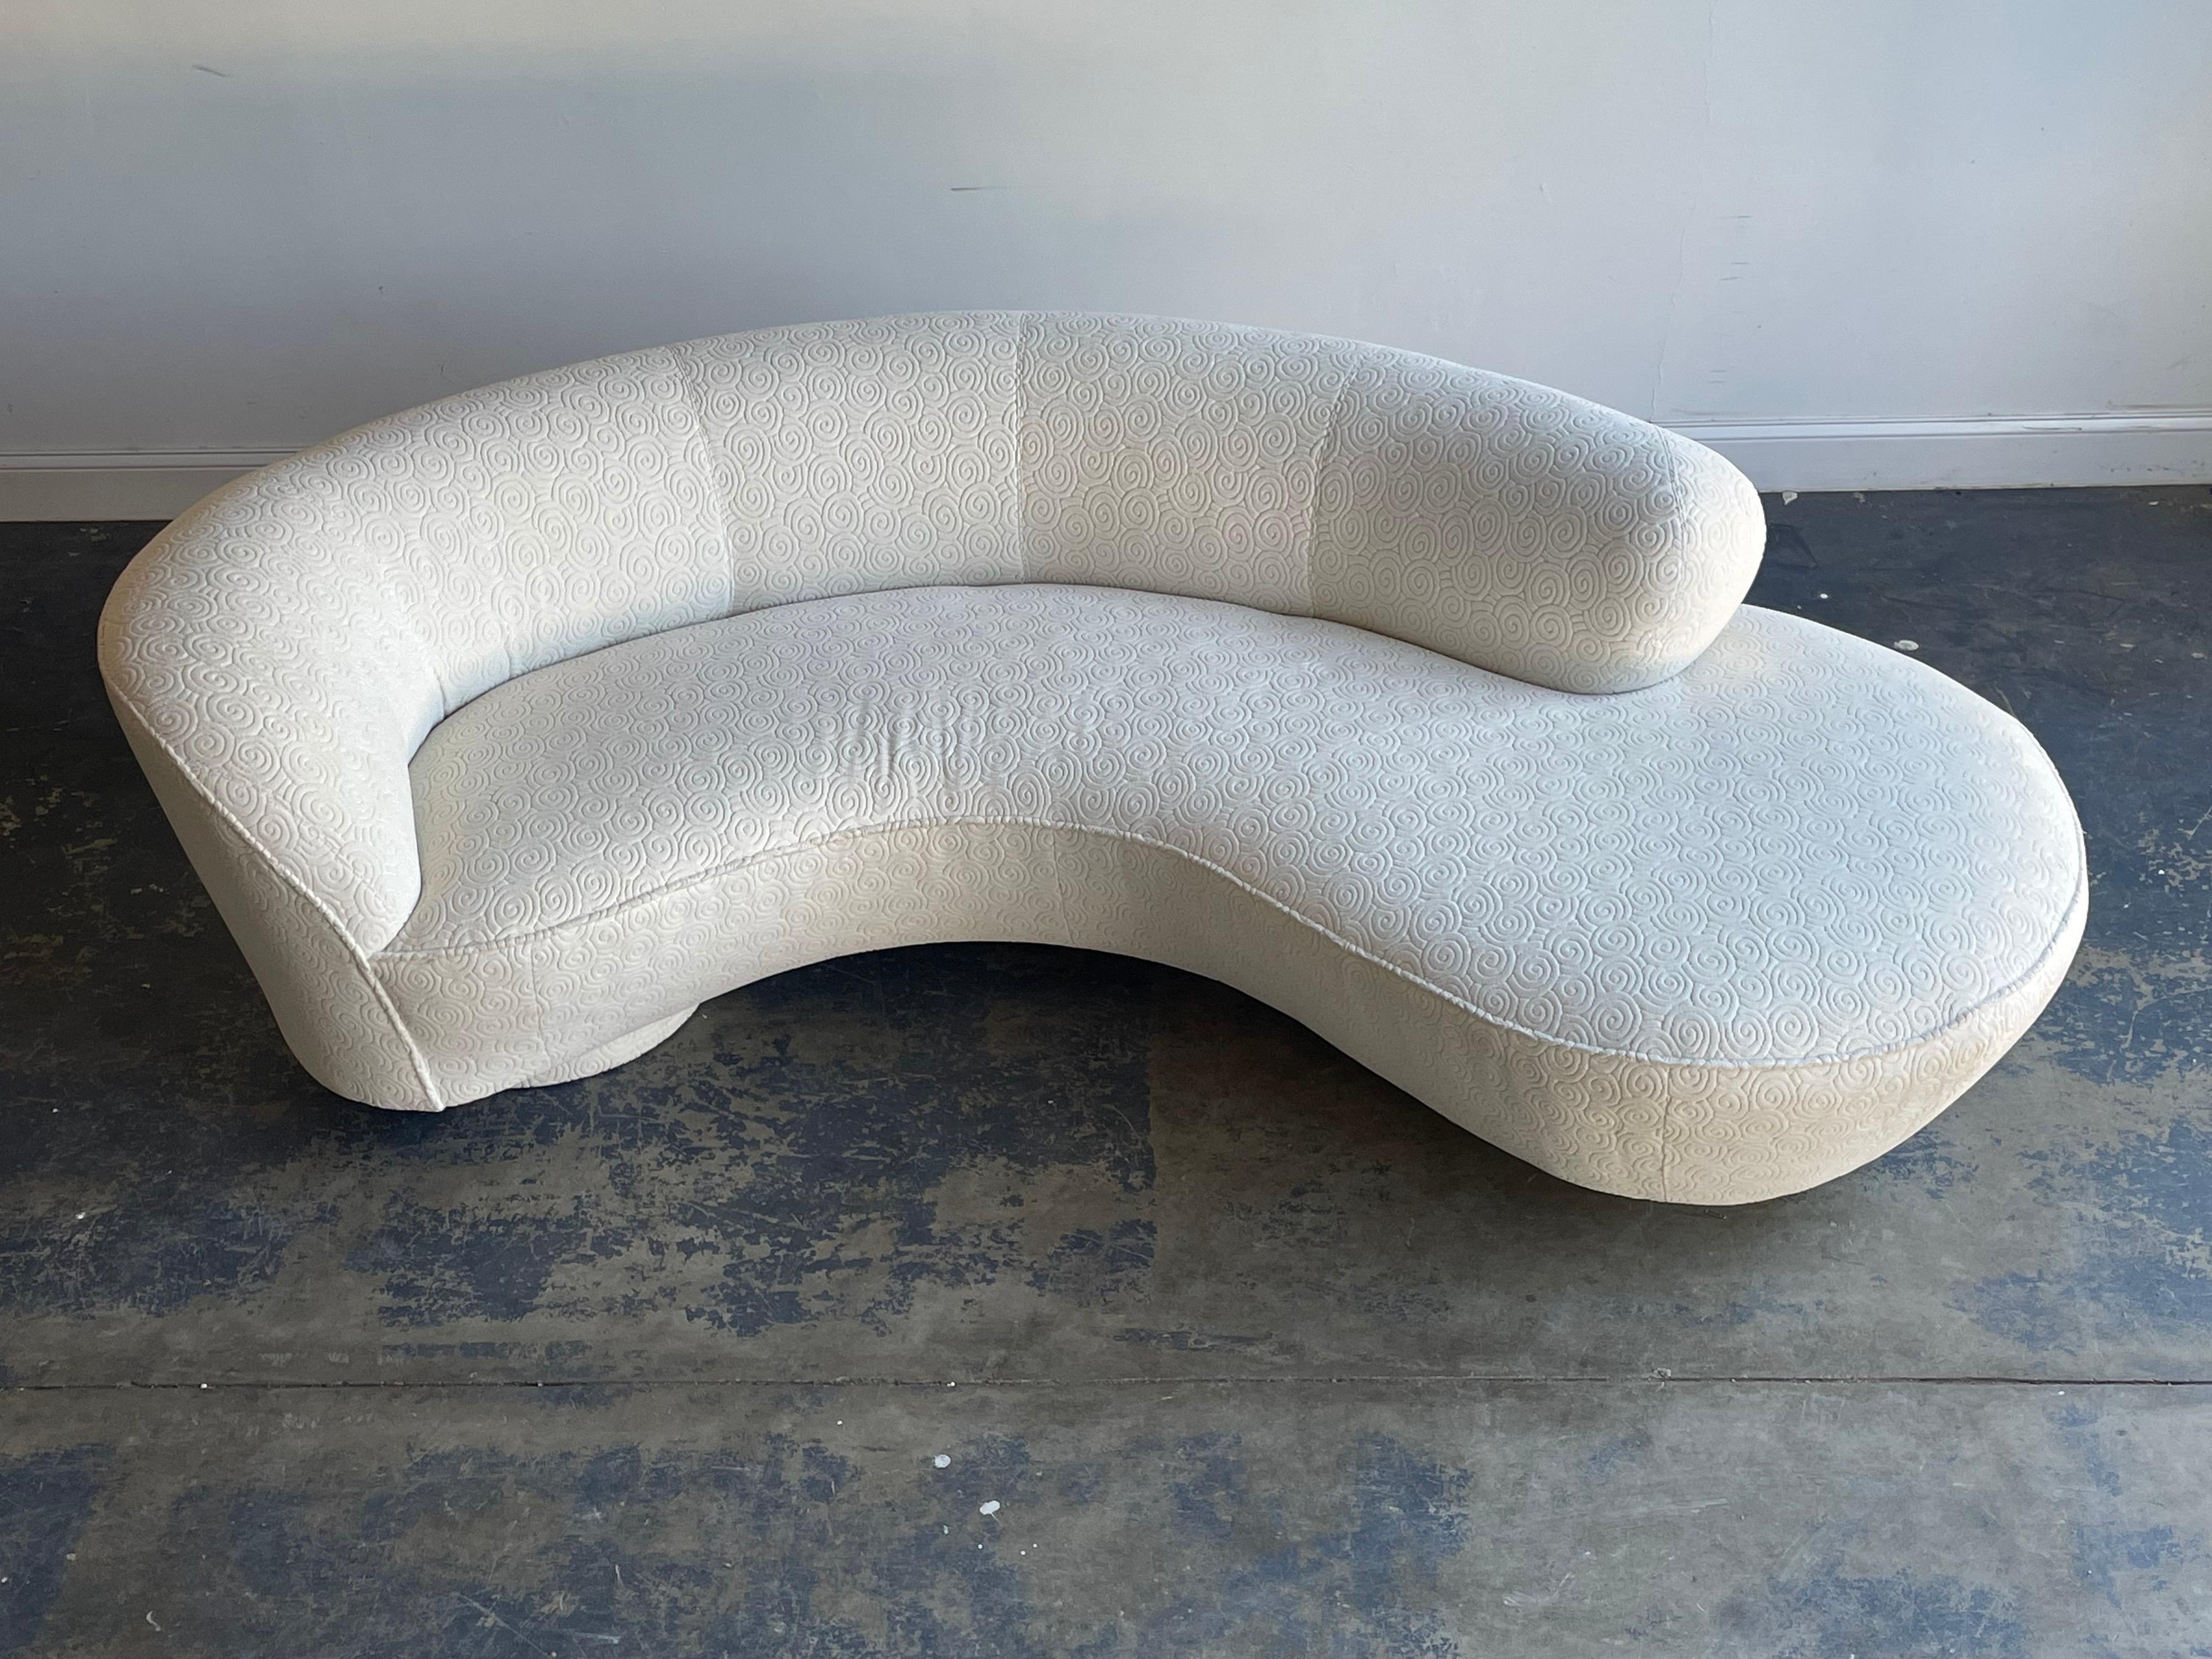 Vintage cloud sofa by Vladimir Kagan for Directional with desired lucite support. Sofa retains originally upholstery which presents very well with no apparent issues. Upholstery is a textured likely cotton velvet.